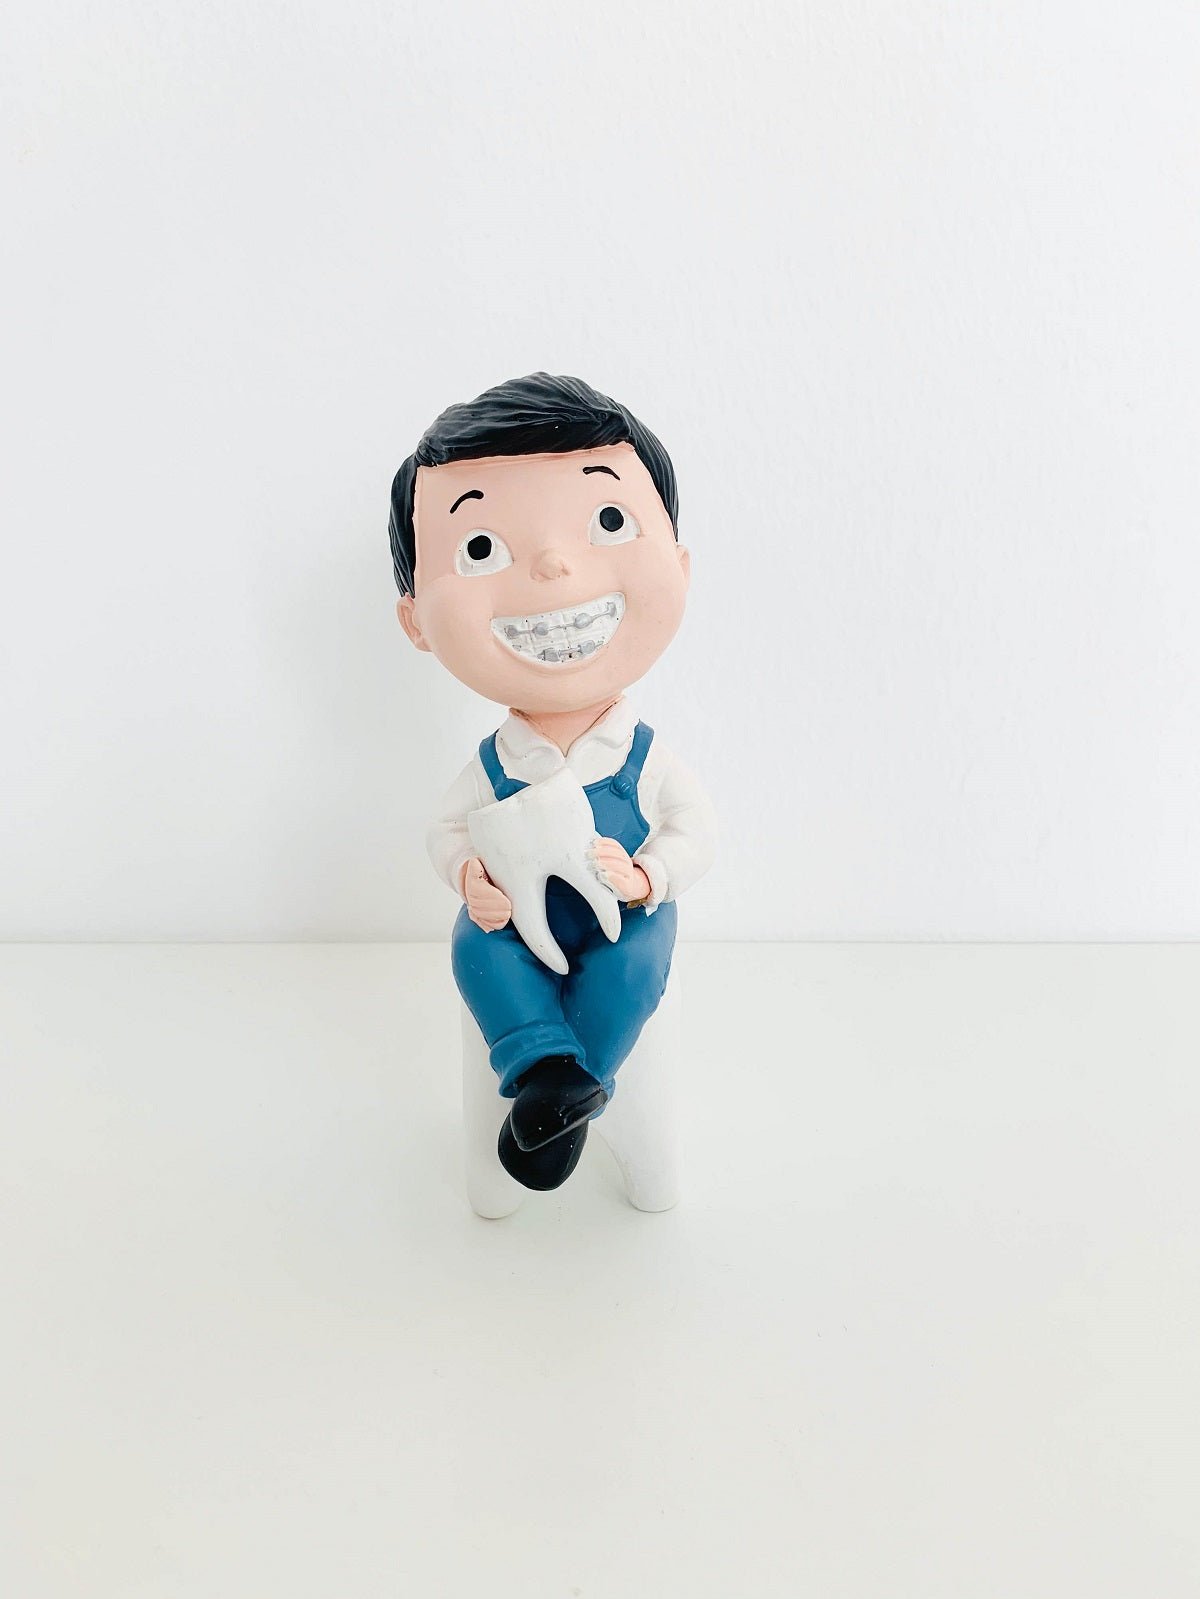 products-boy_with_tooth_figurine-917790-jpg